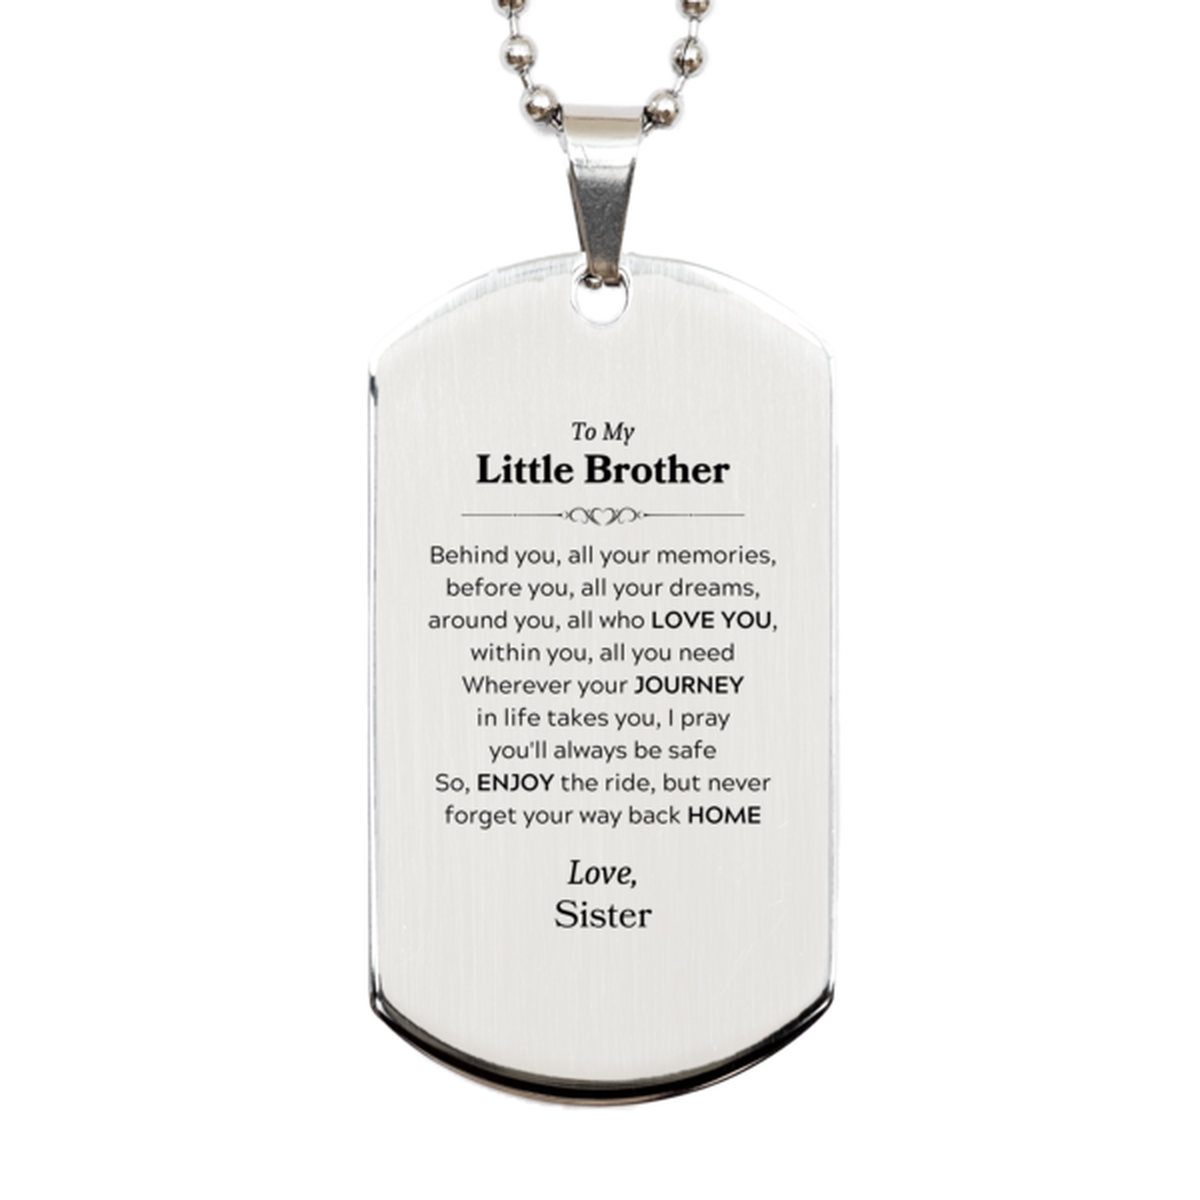 To My Little Brother Graduation Gifts from Sister, Little Brother Silver Dog Tag Christmas Birthday Gifts for Little Brother Behind you, all your memories, before you, all your dreams. Love, Sister